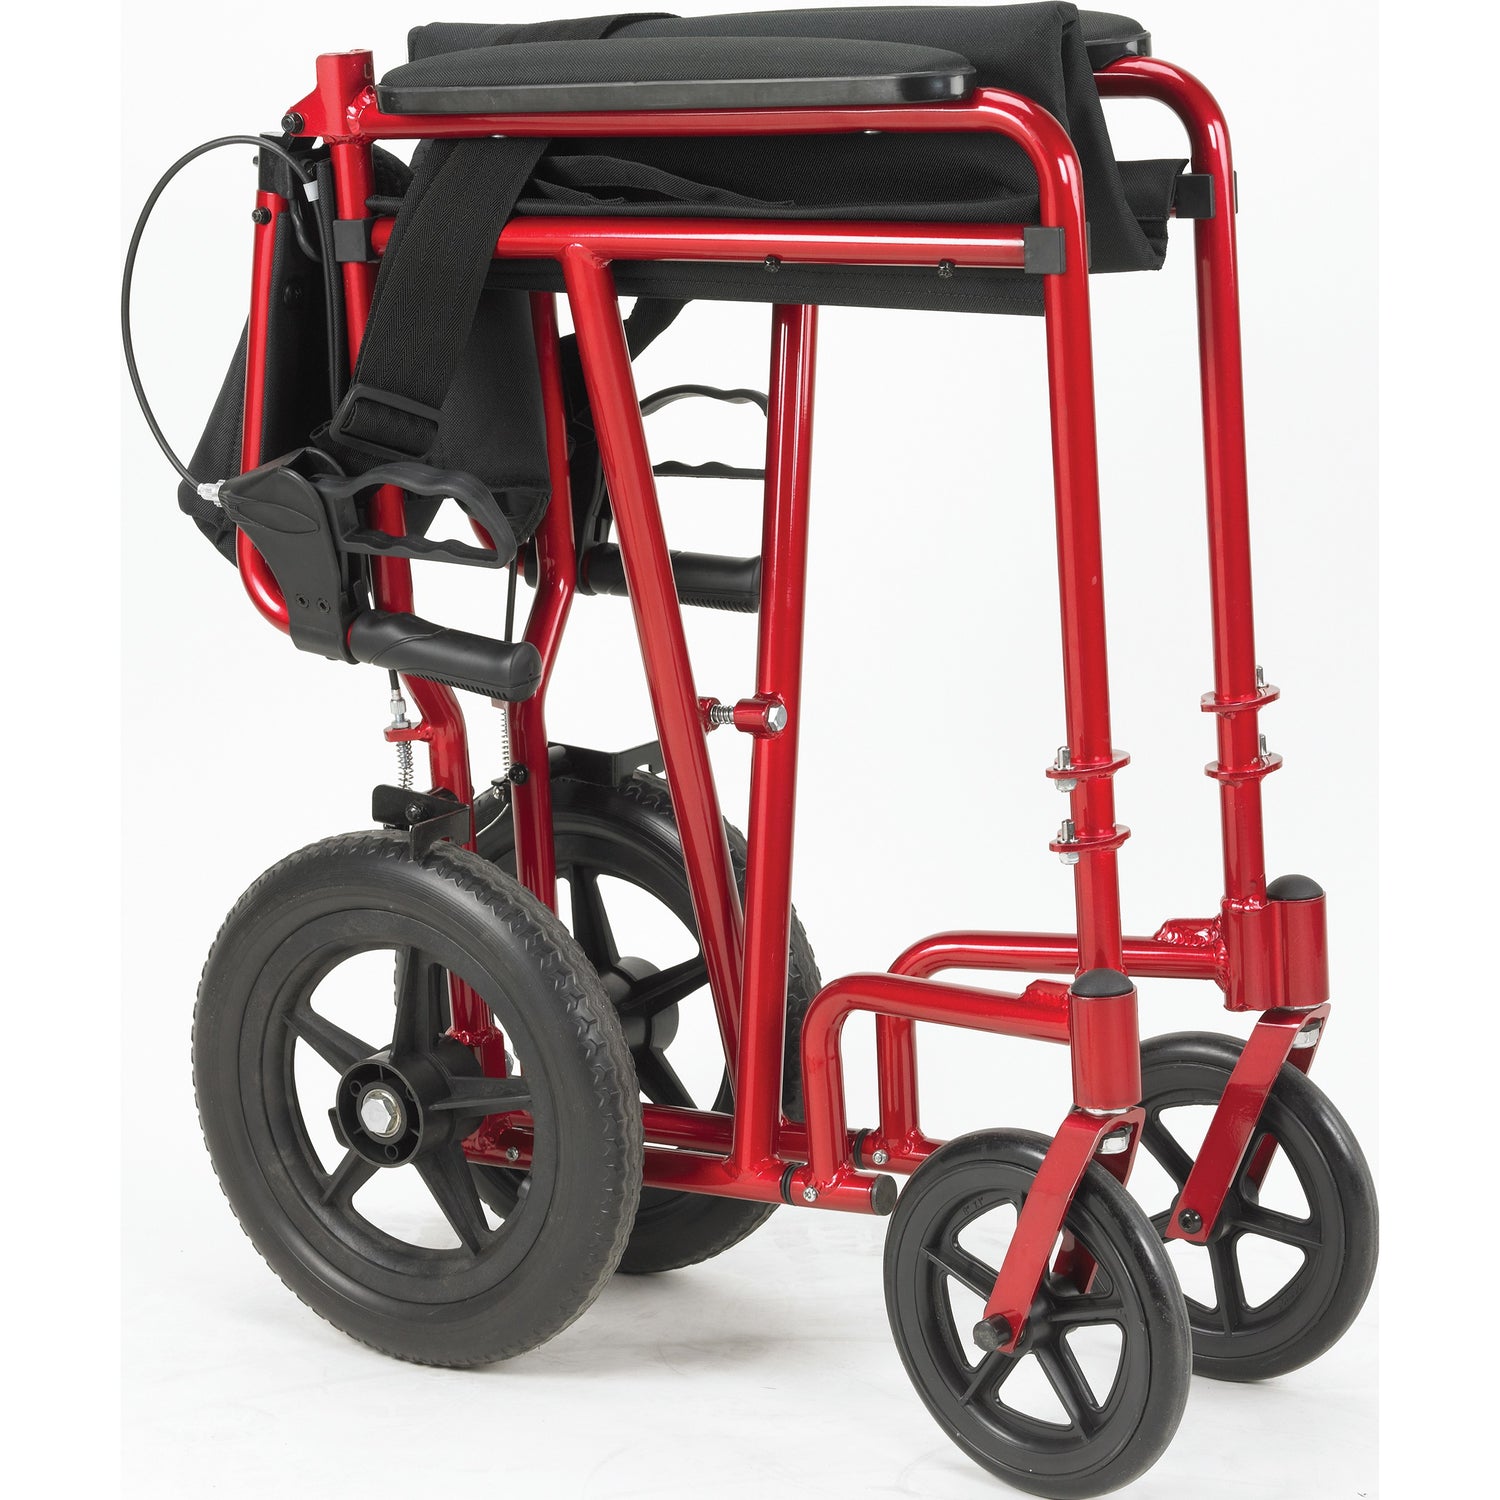 Drive Lightweight Expedition Aluminum Transport Chair Drive Lightweight Expedition Aluminum Transport Chair Transport Wheelchairs Drive - Americare Medical Supply